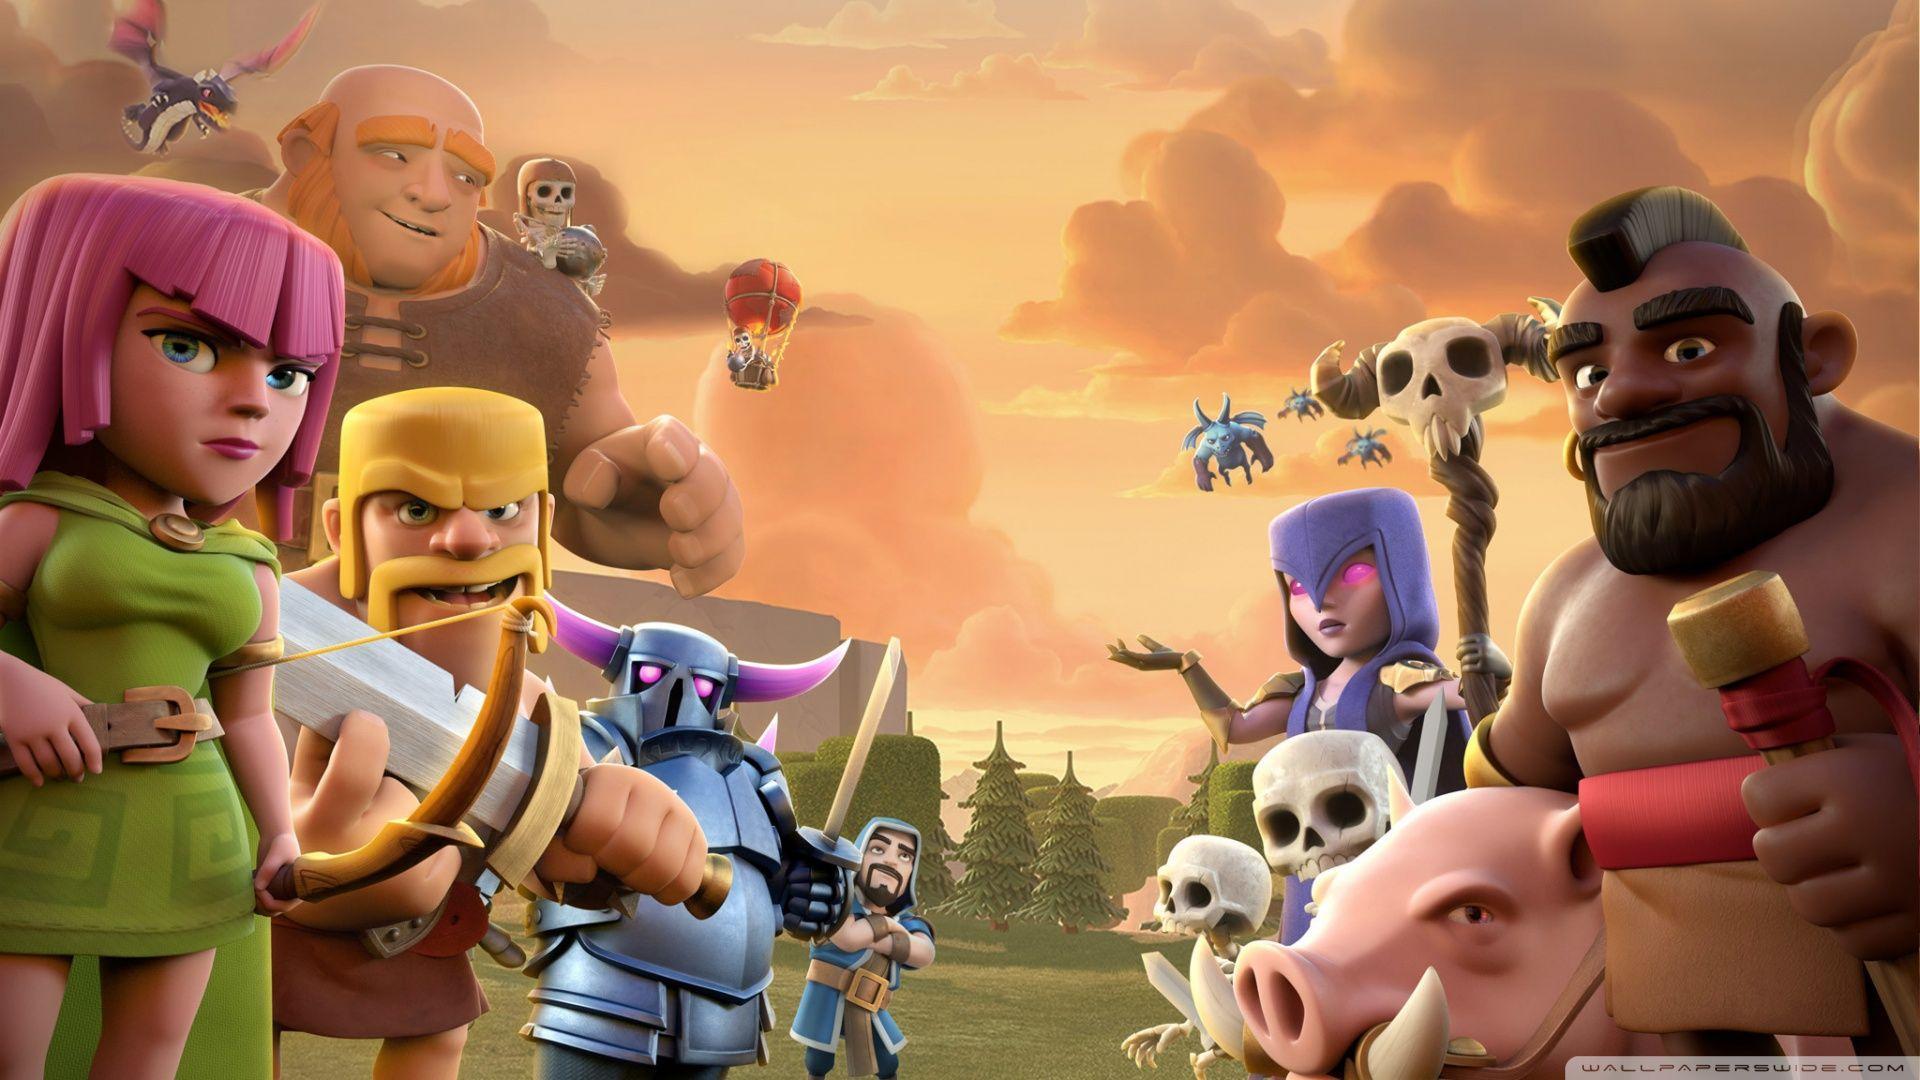 Clash Of Clans HD desktop wallpapers : High Definition : Mobile